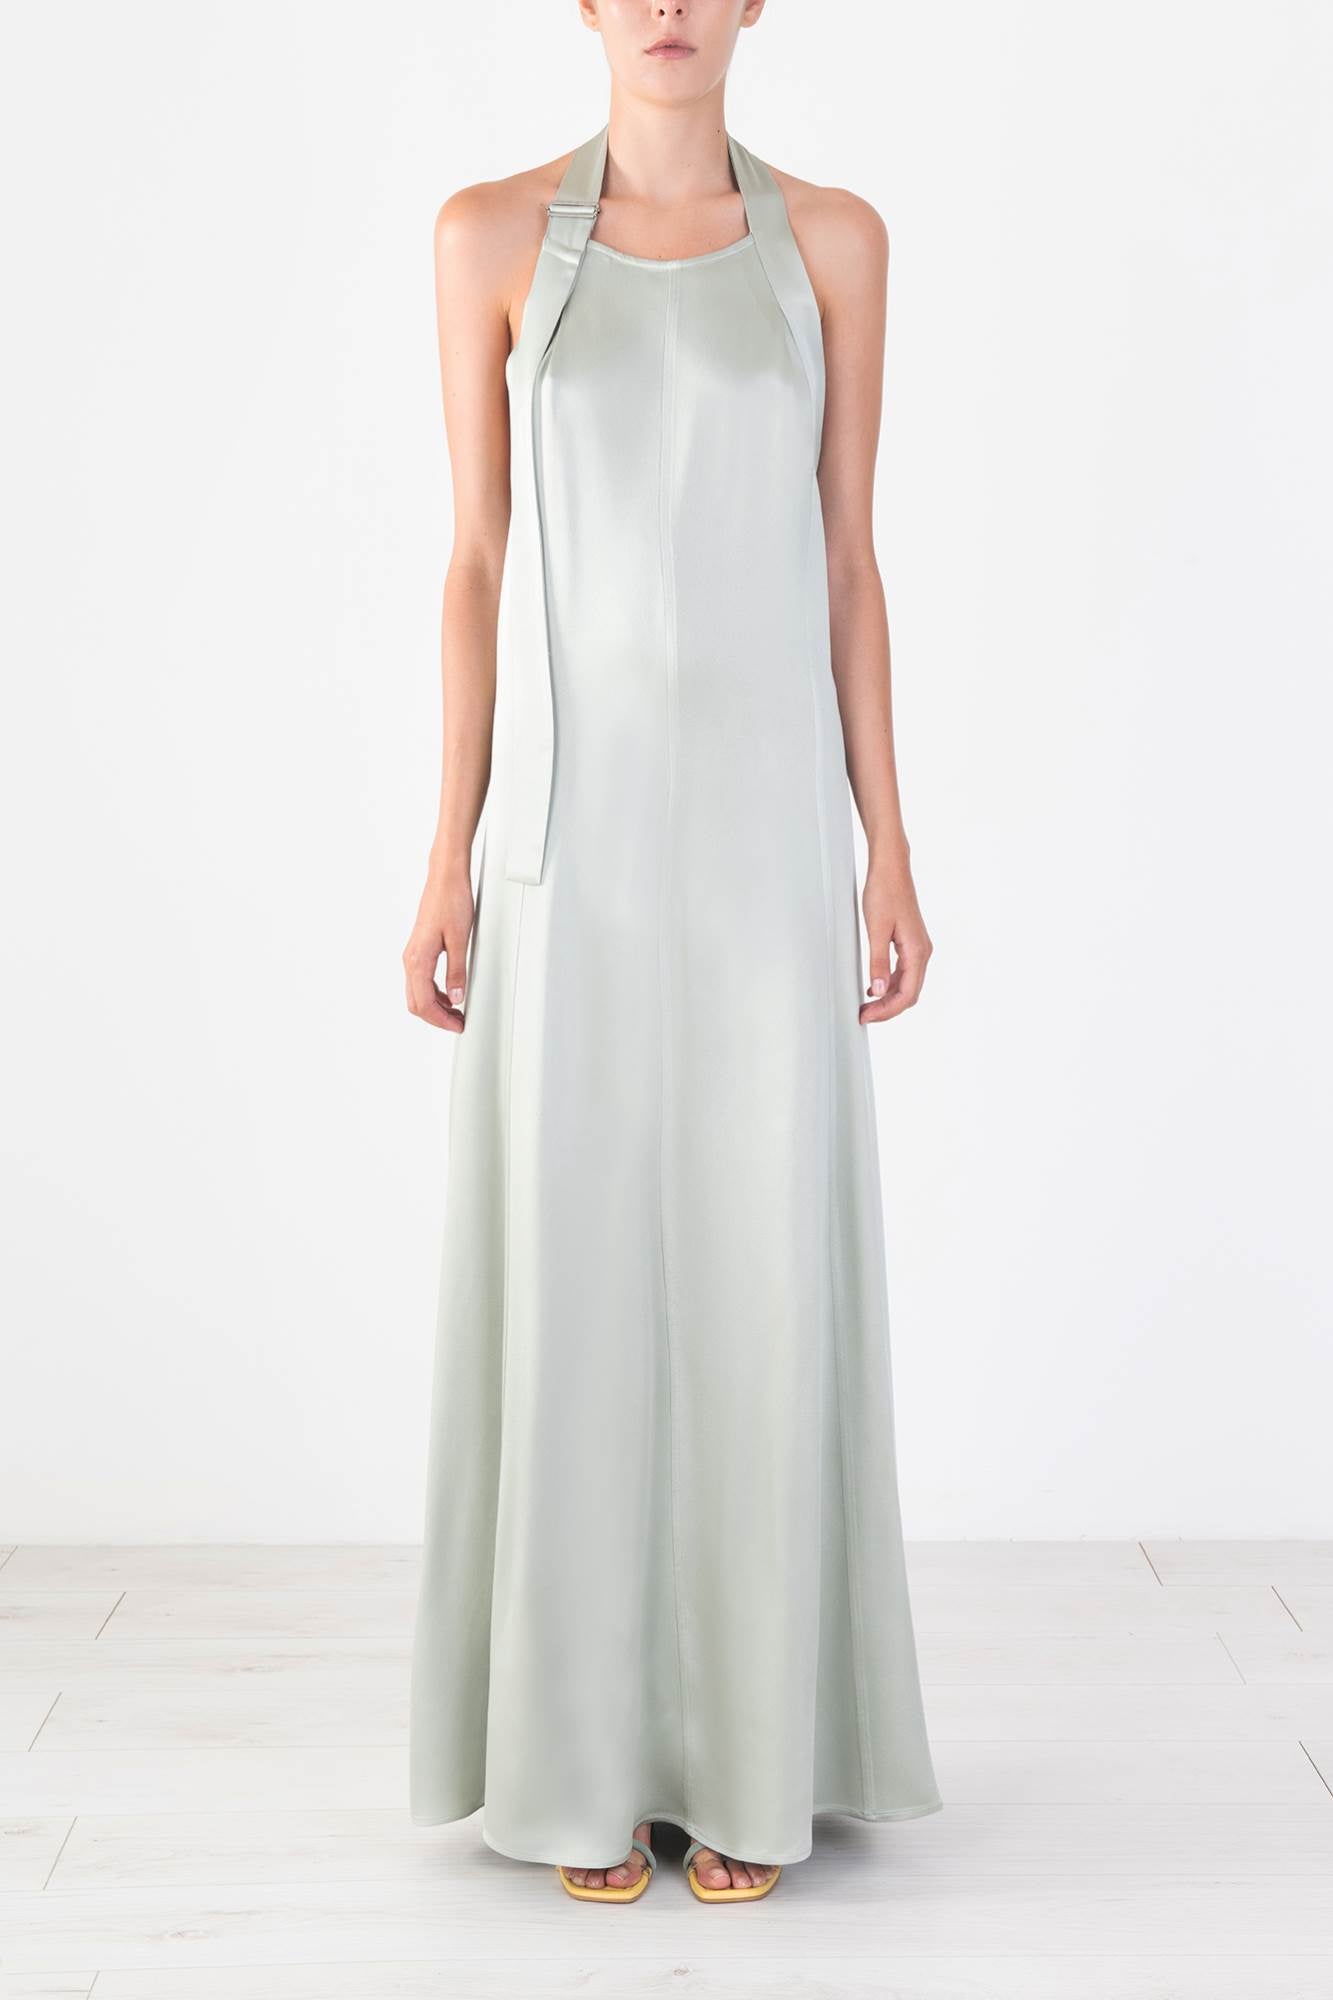 LONG SATIN DRESS WITH UNCOVERED BACK